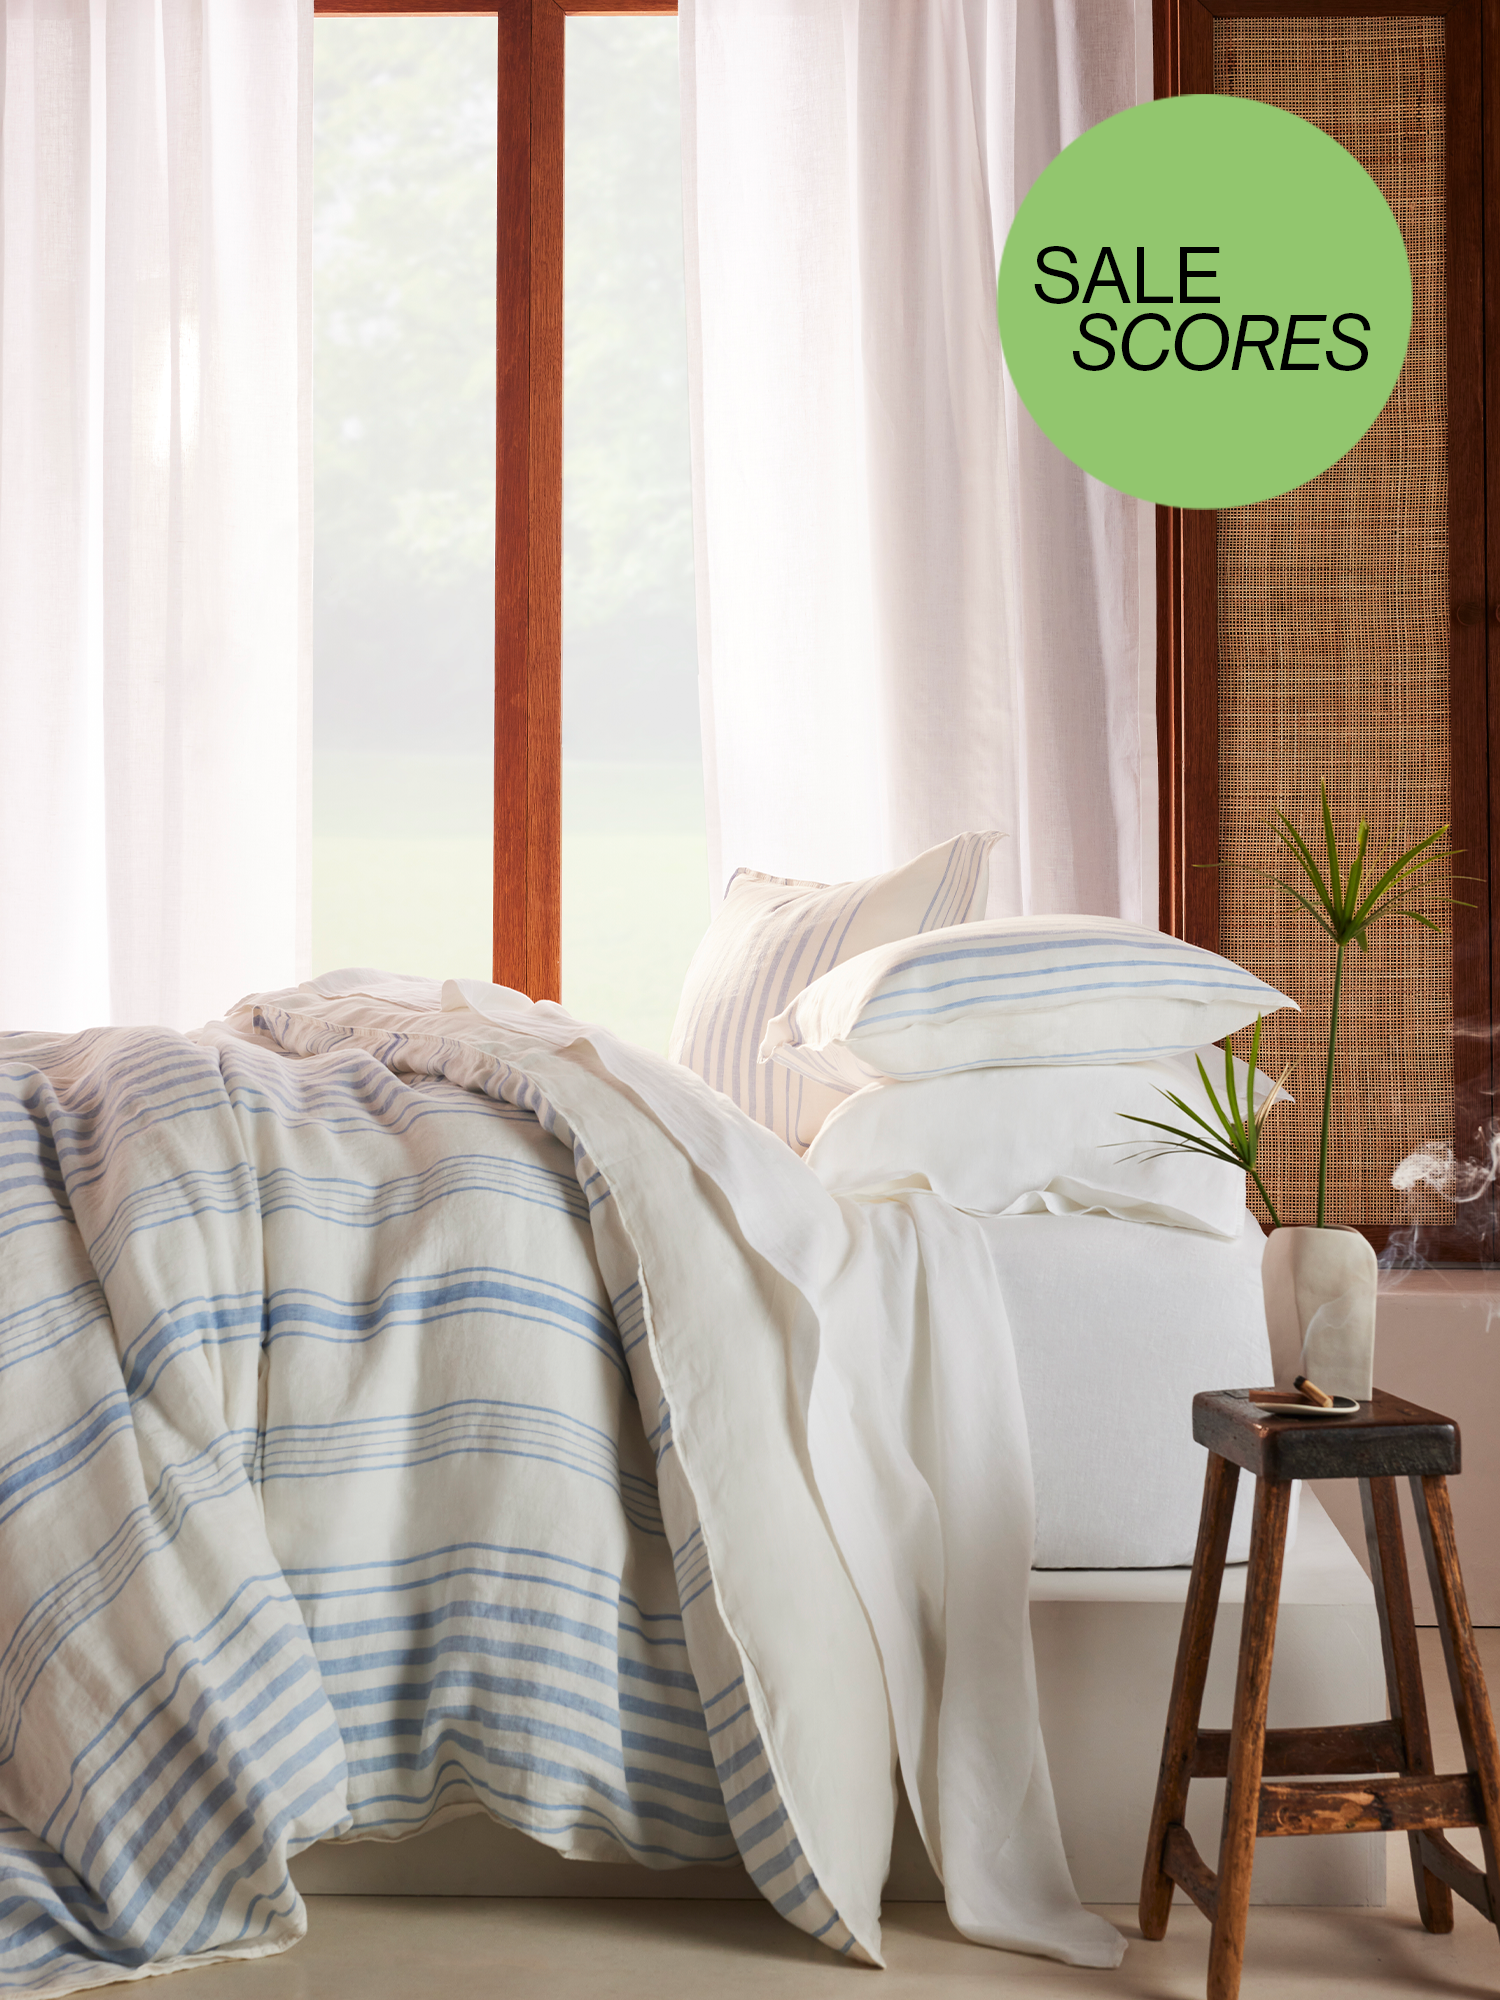 striped duvet bed with sale scores button